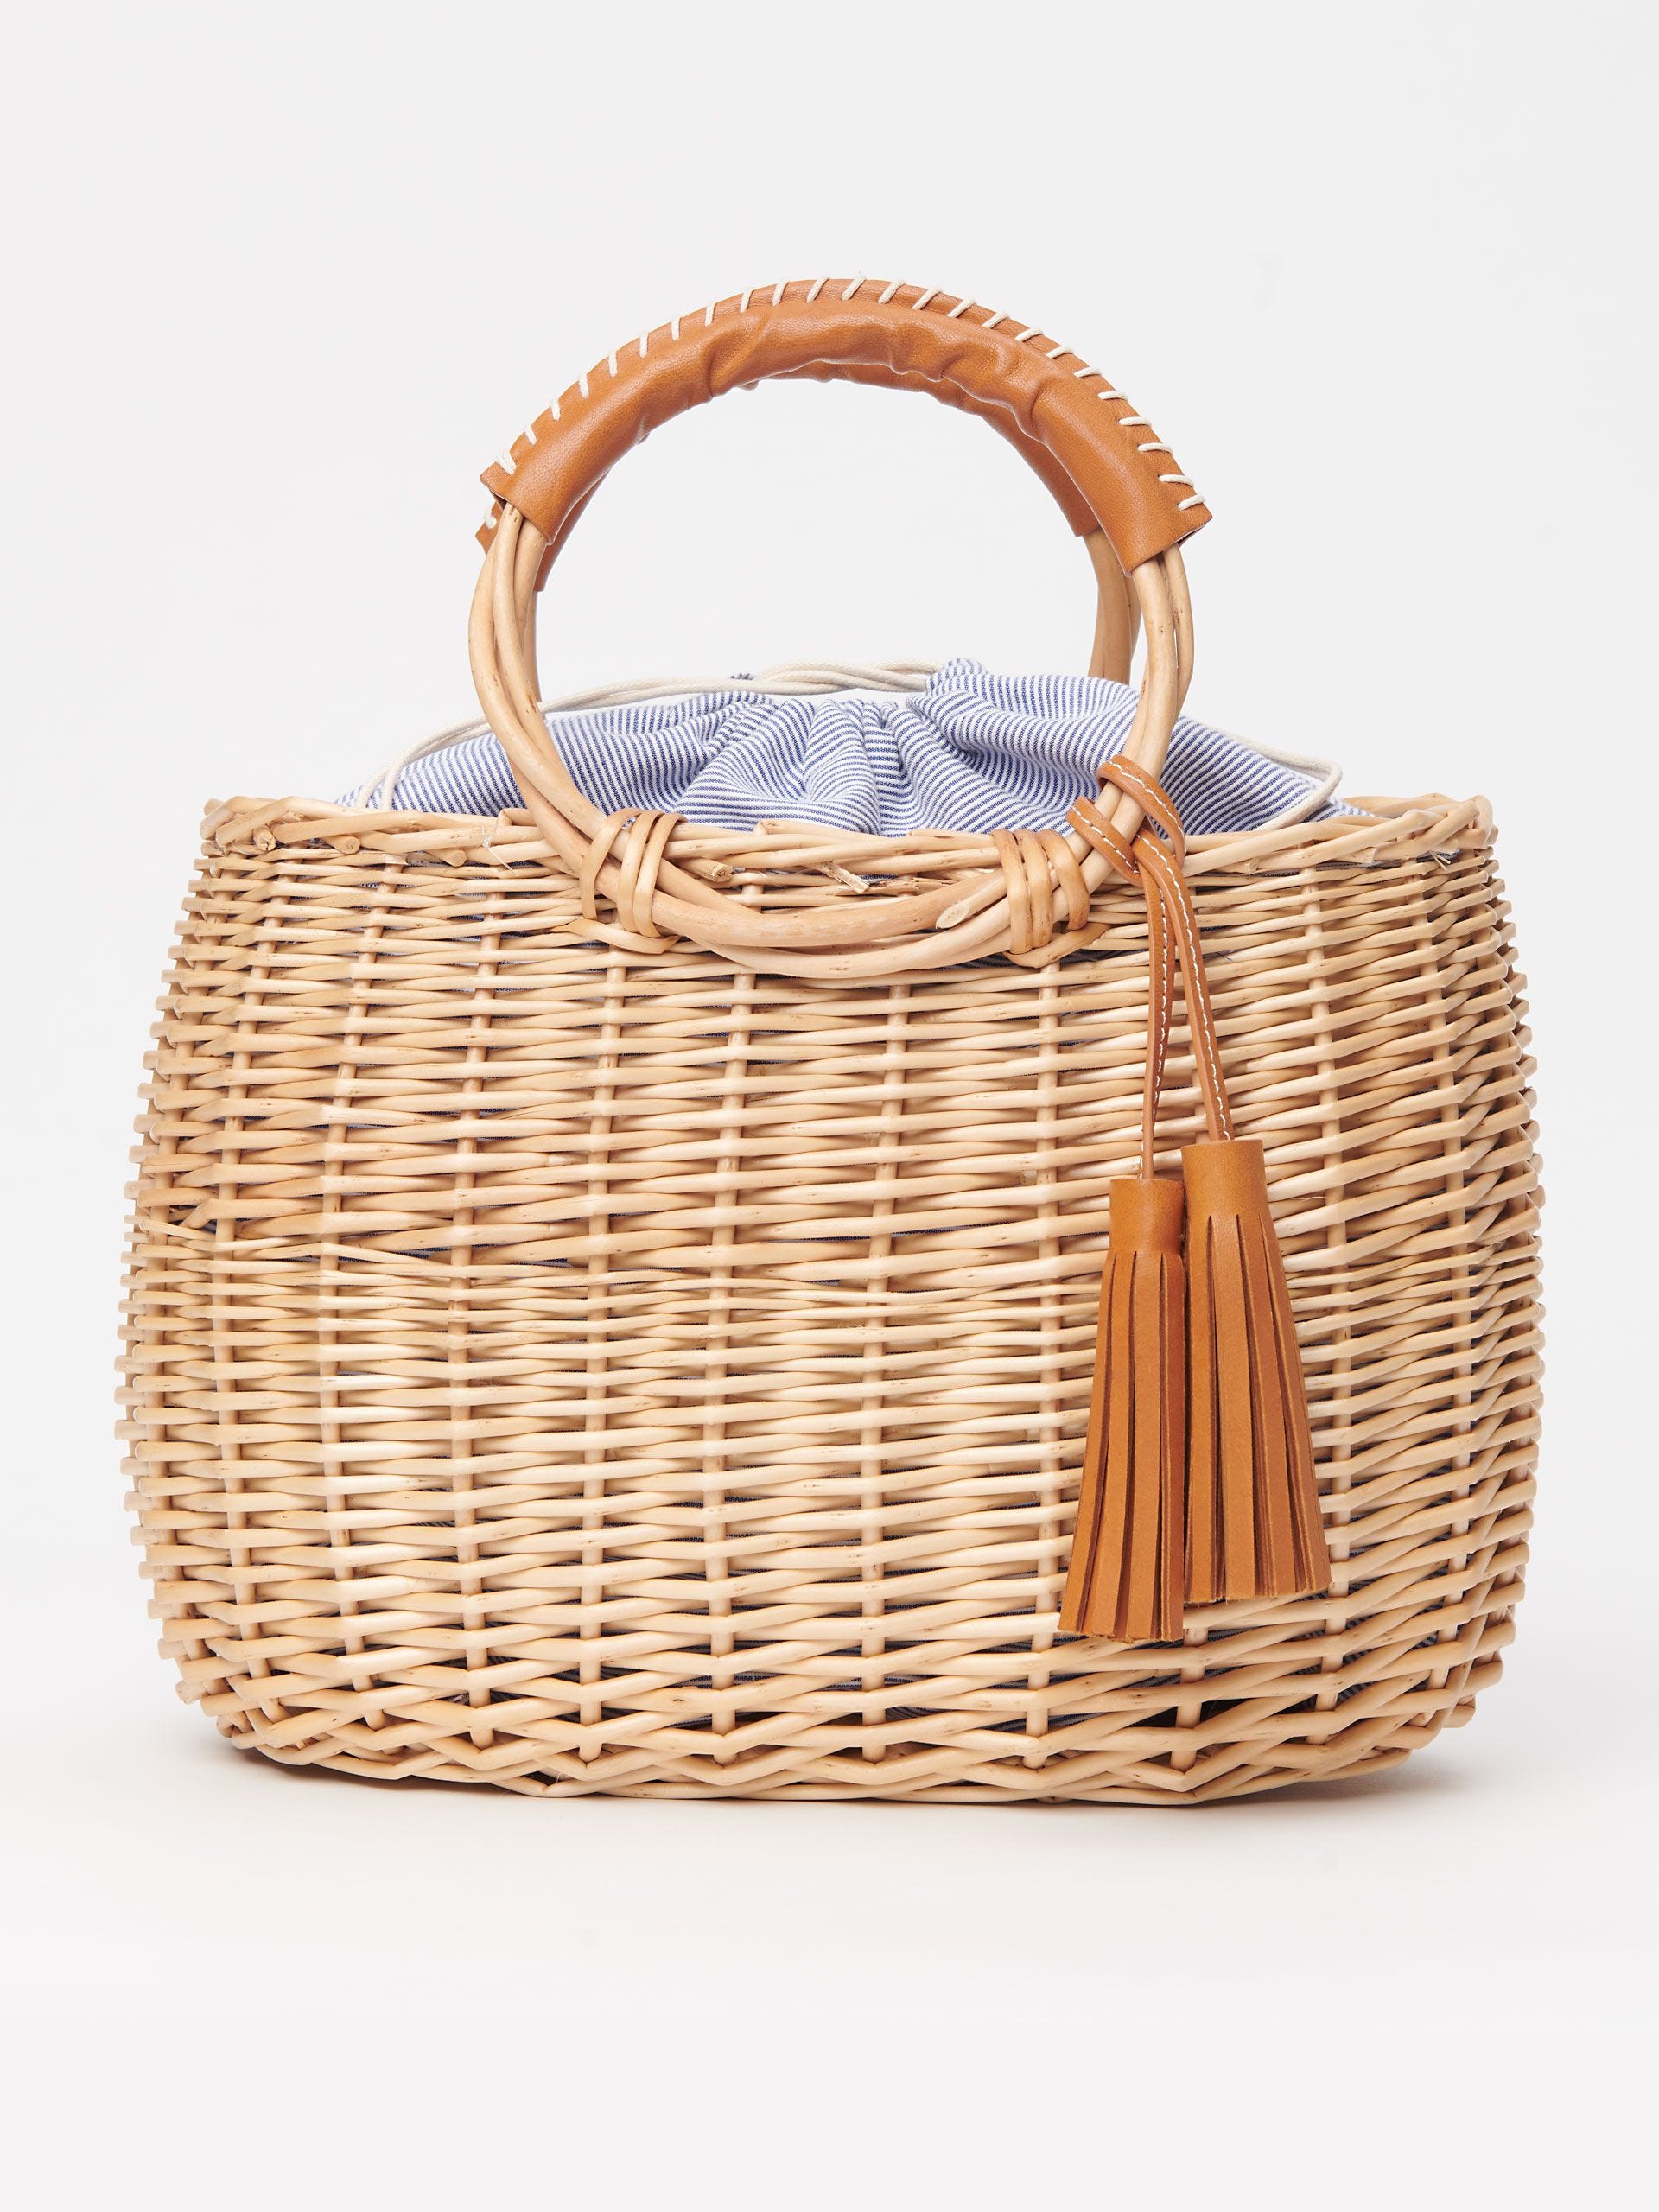 Wicker Bag with Leather Handles